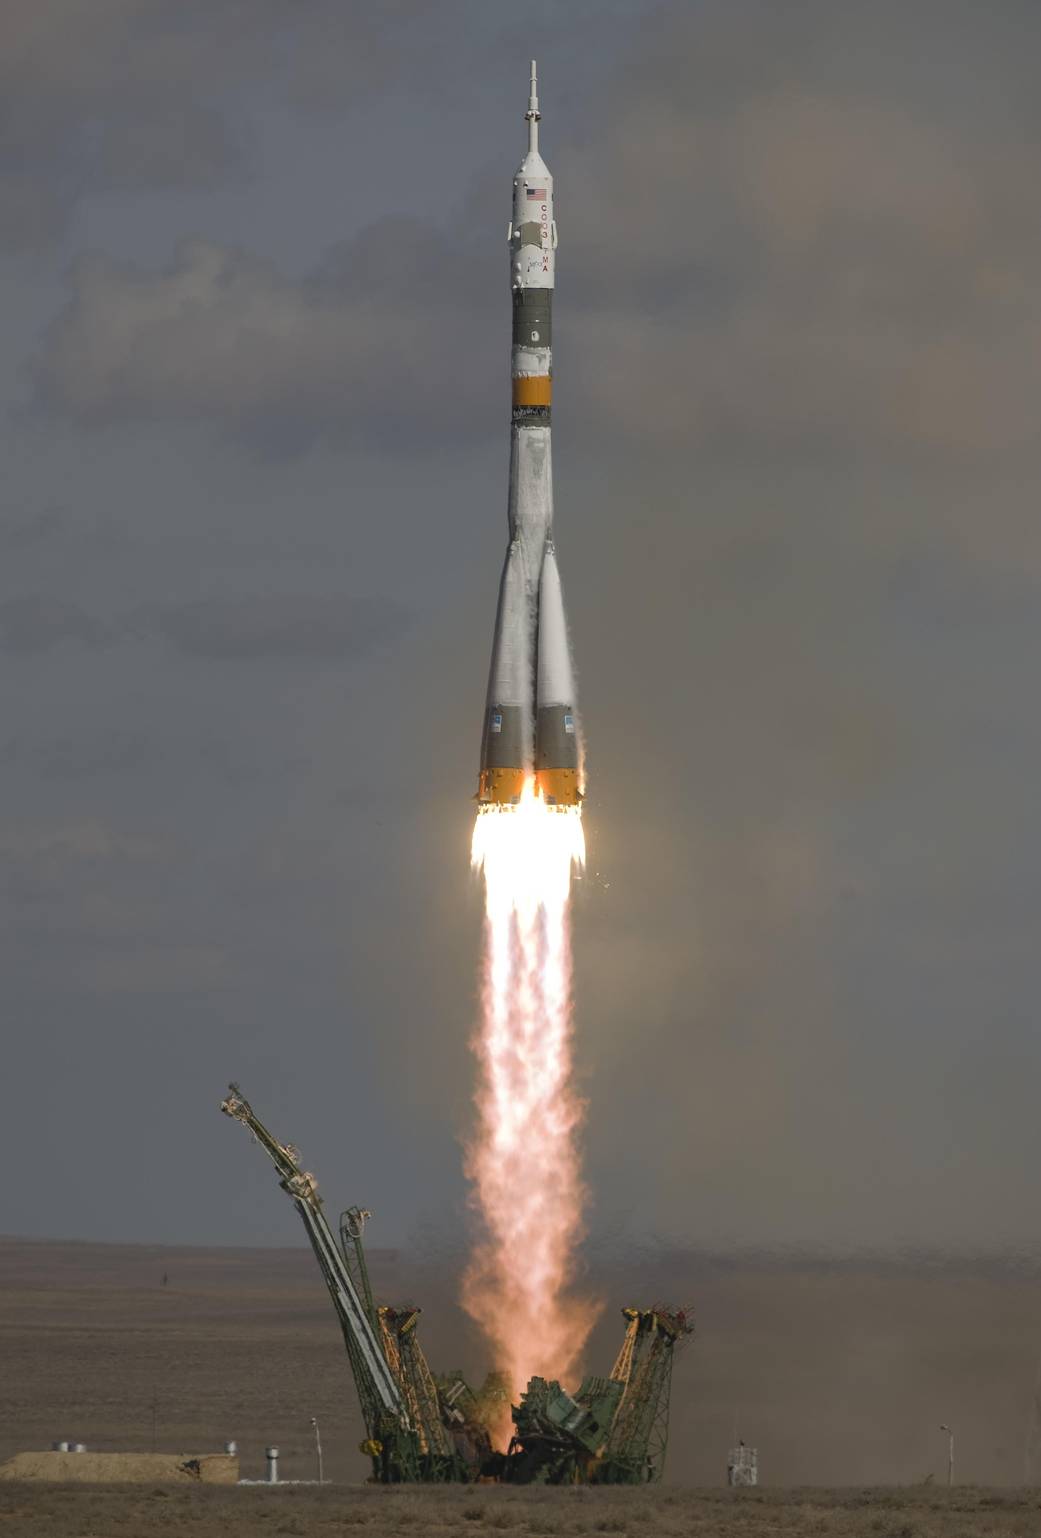 Expedition 18 Lifts Off!